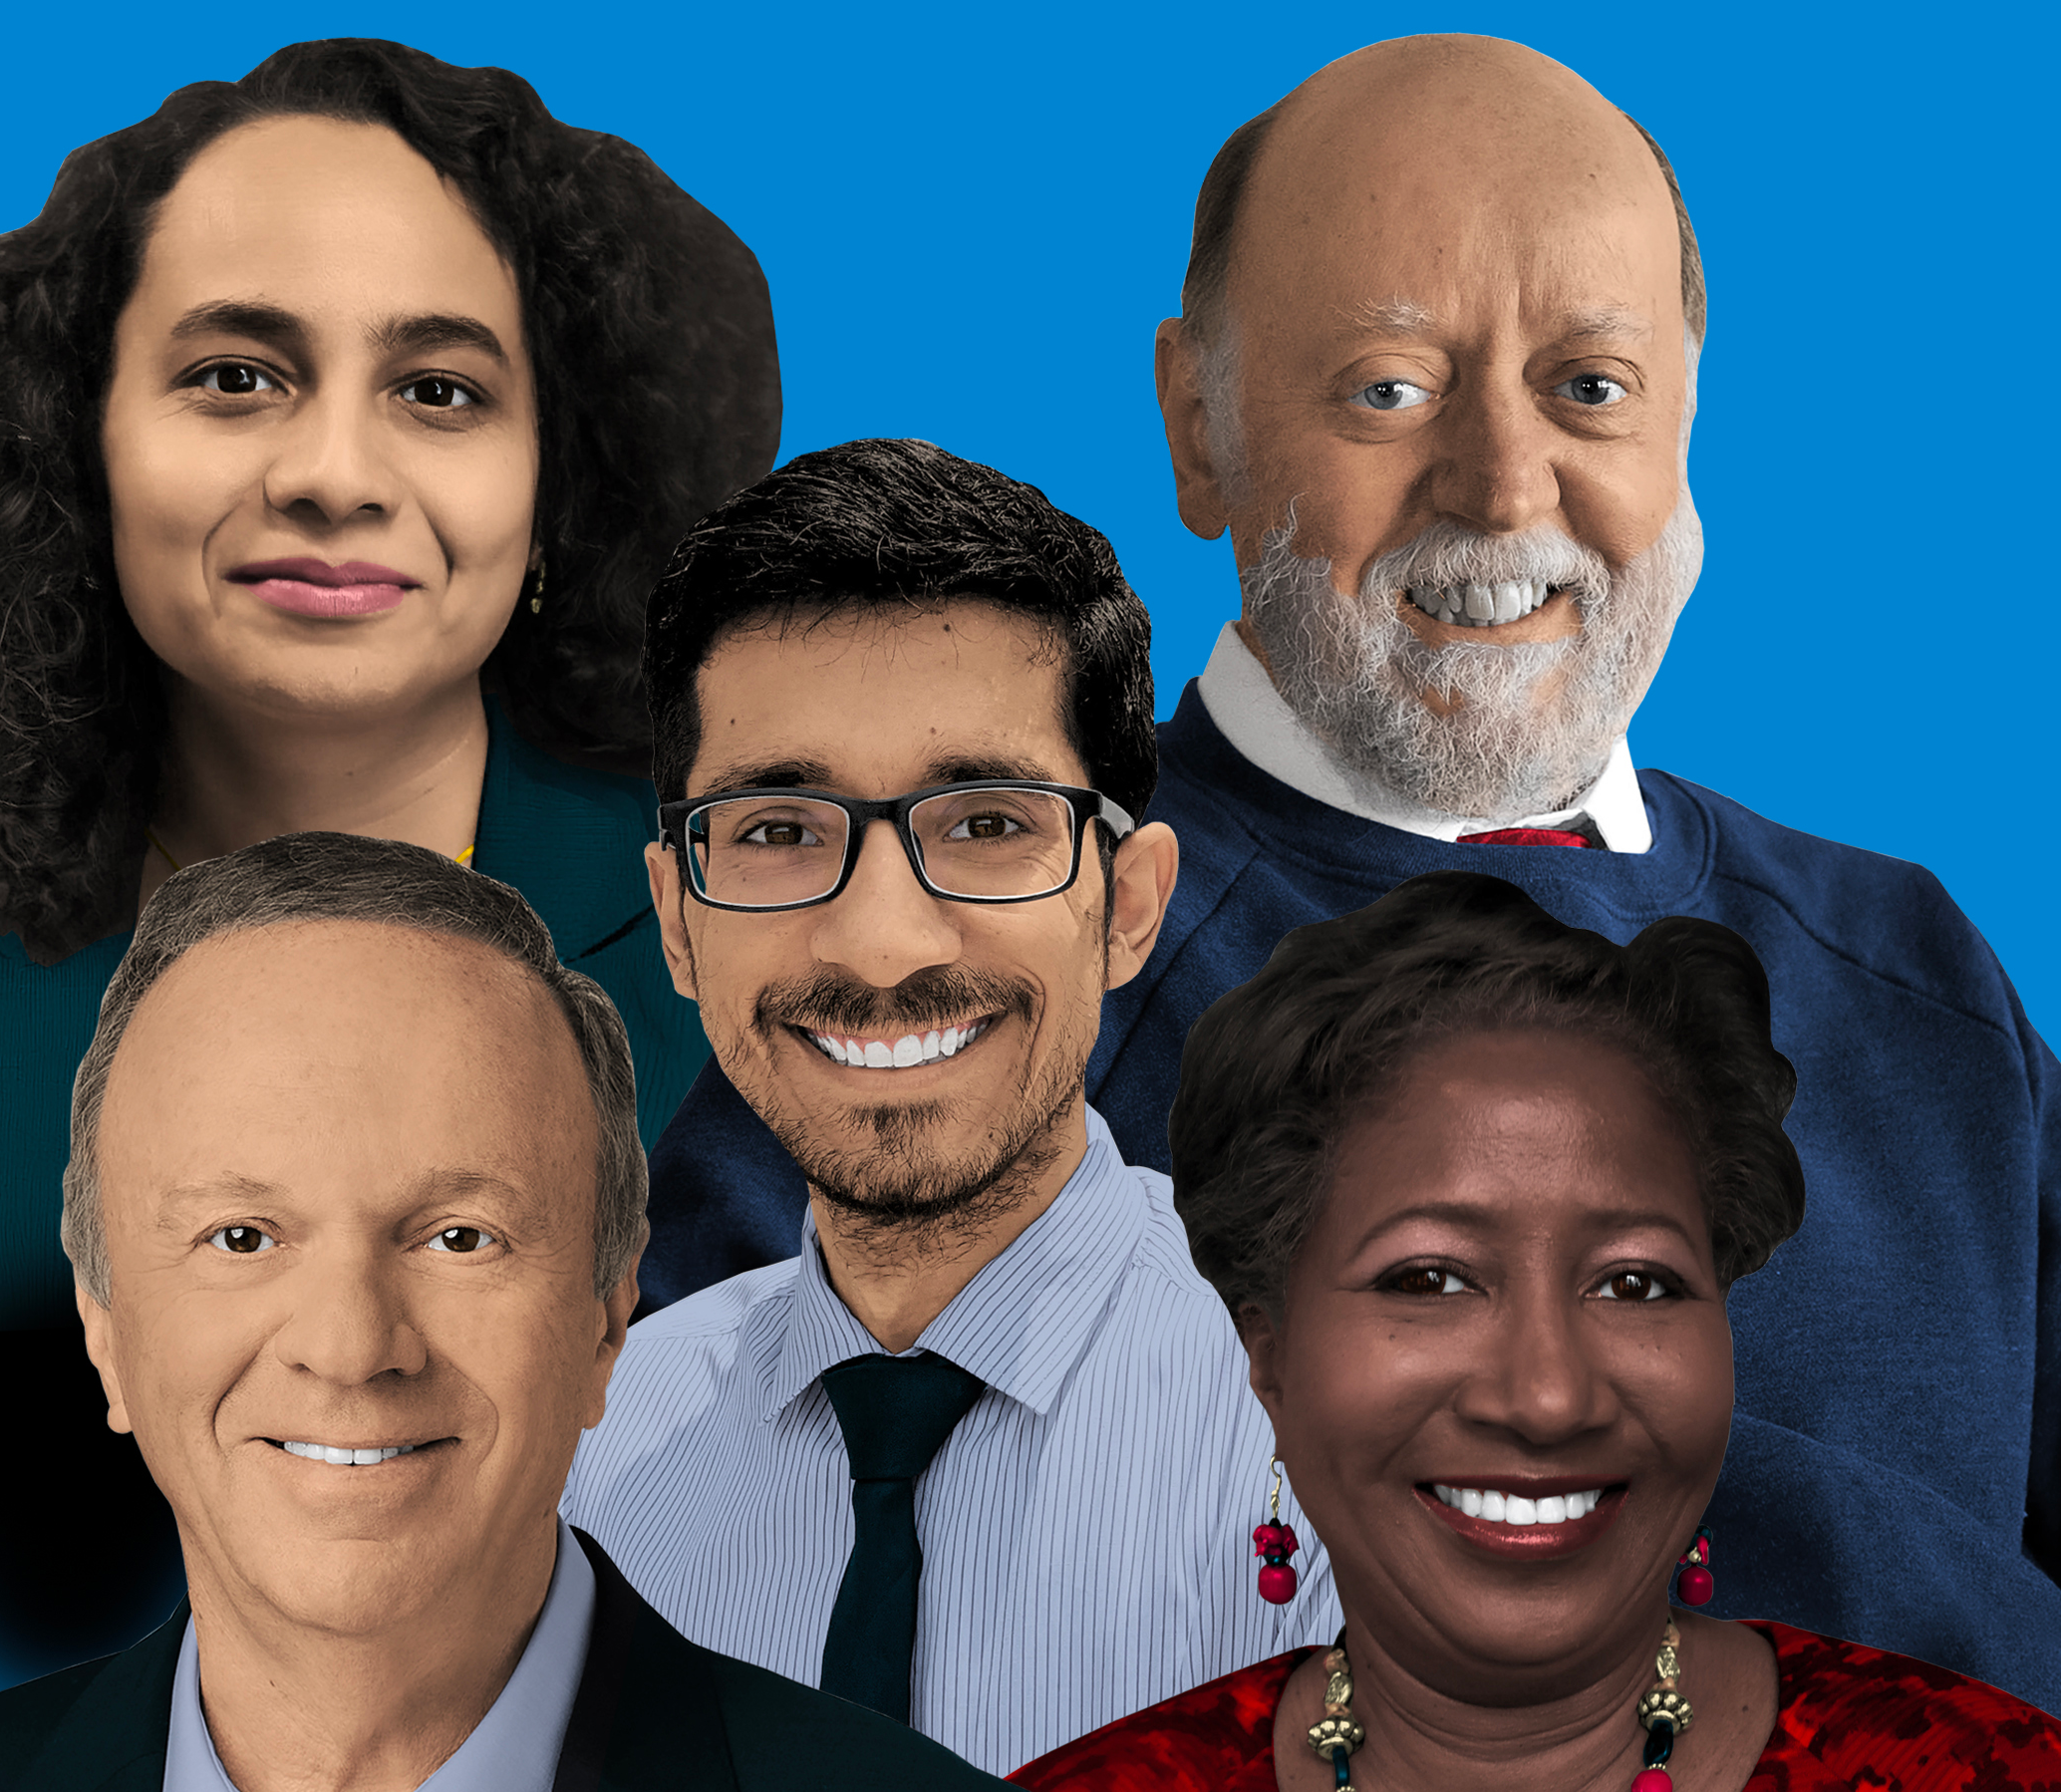 A collage of 5 people on a blue background.  